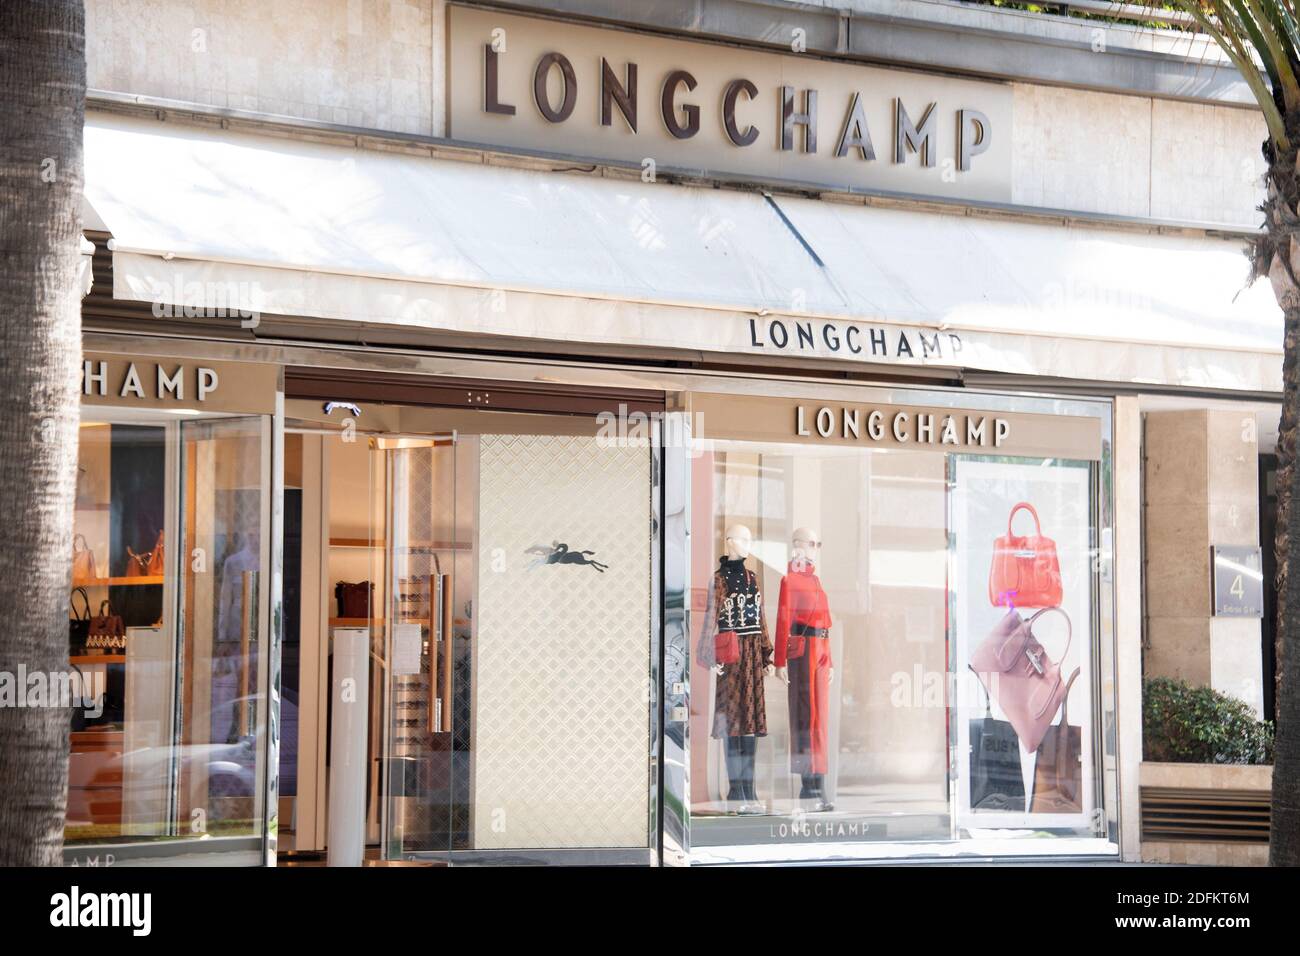 A shop sign of LONGCHAMP, on October 13, 2020 in Cannes, France. Photo by  David Niviere/ABACAPRESS.COM Stock Photo - Alamy